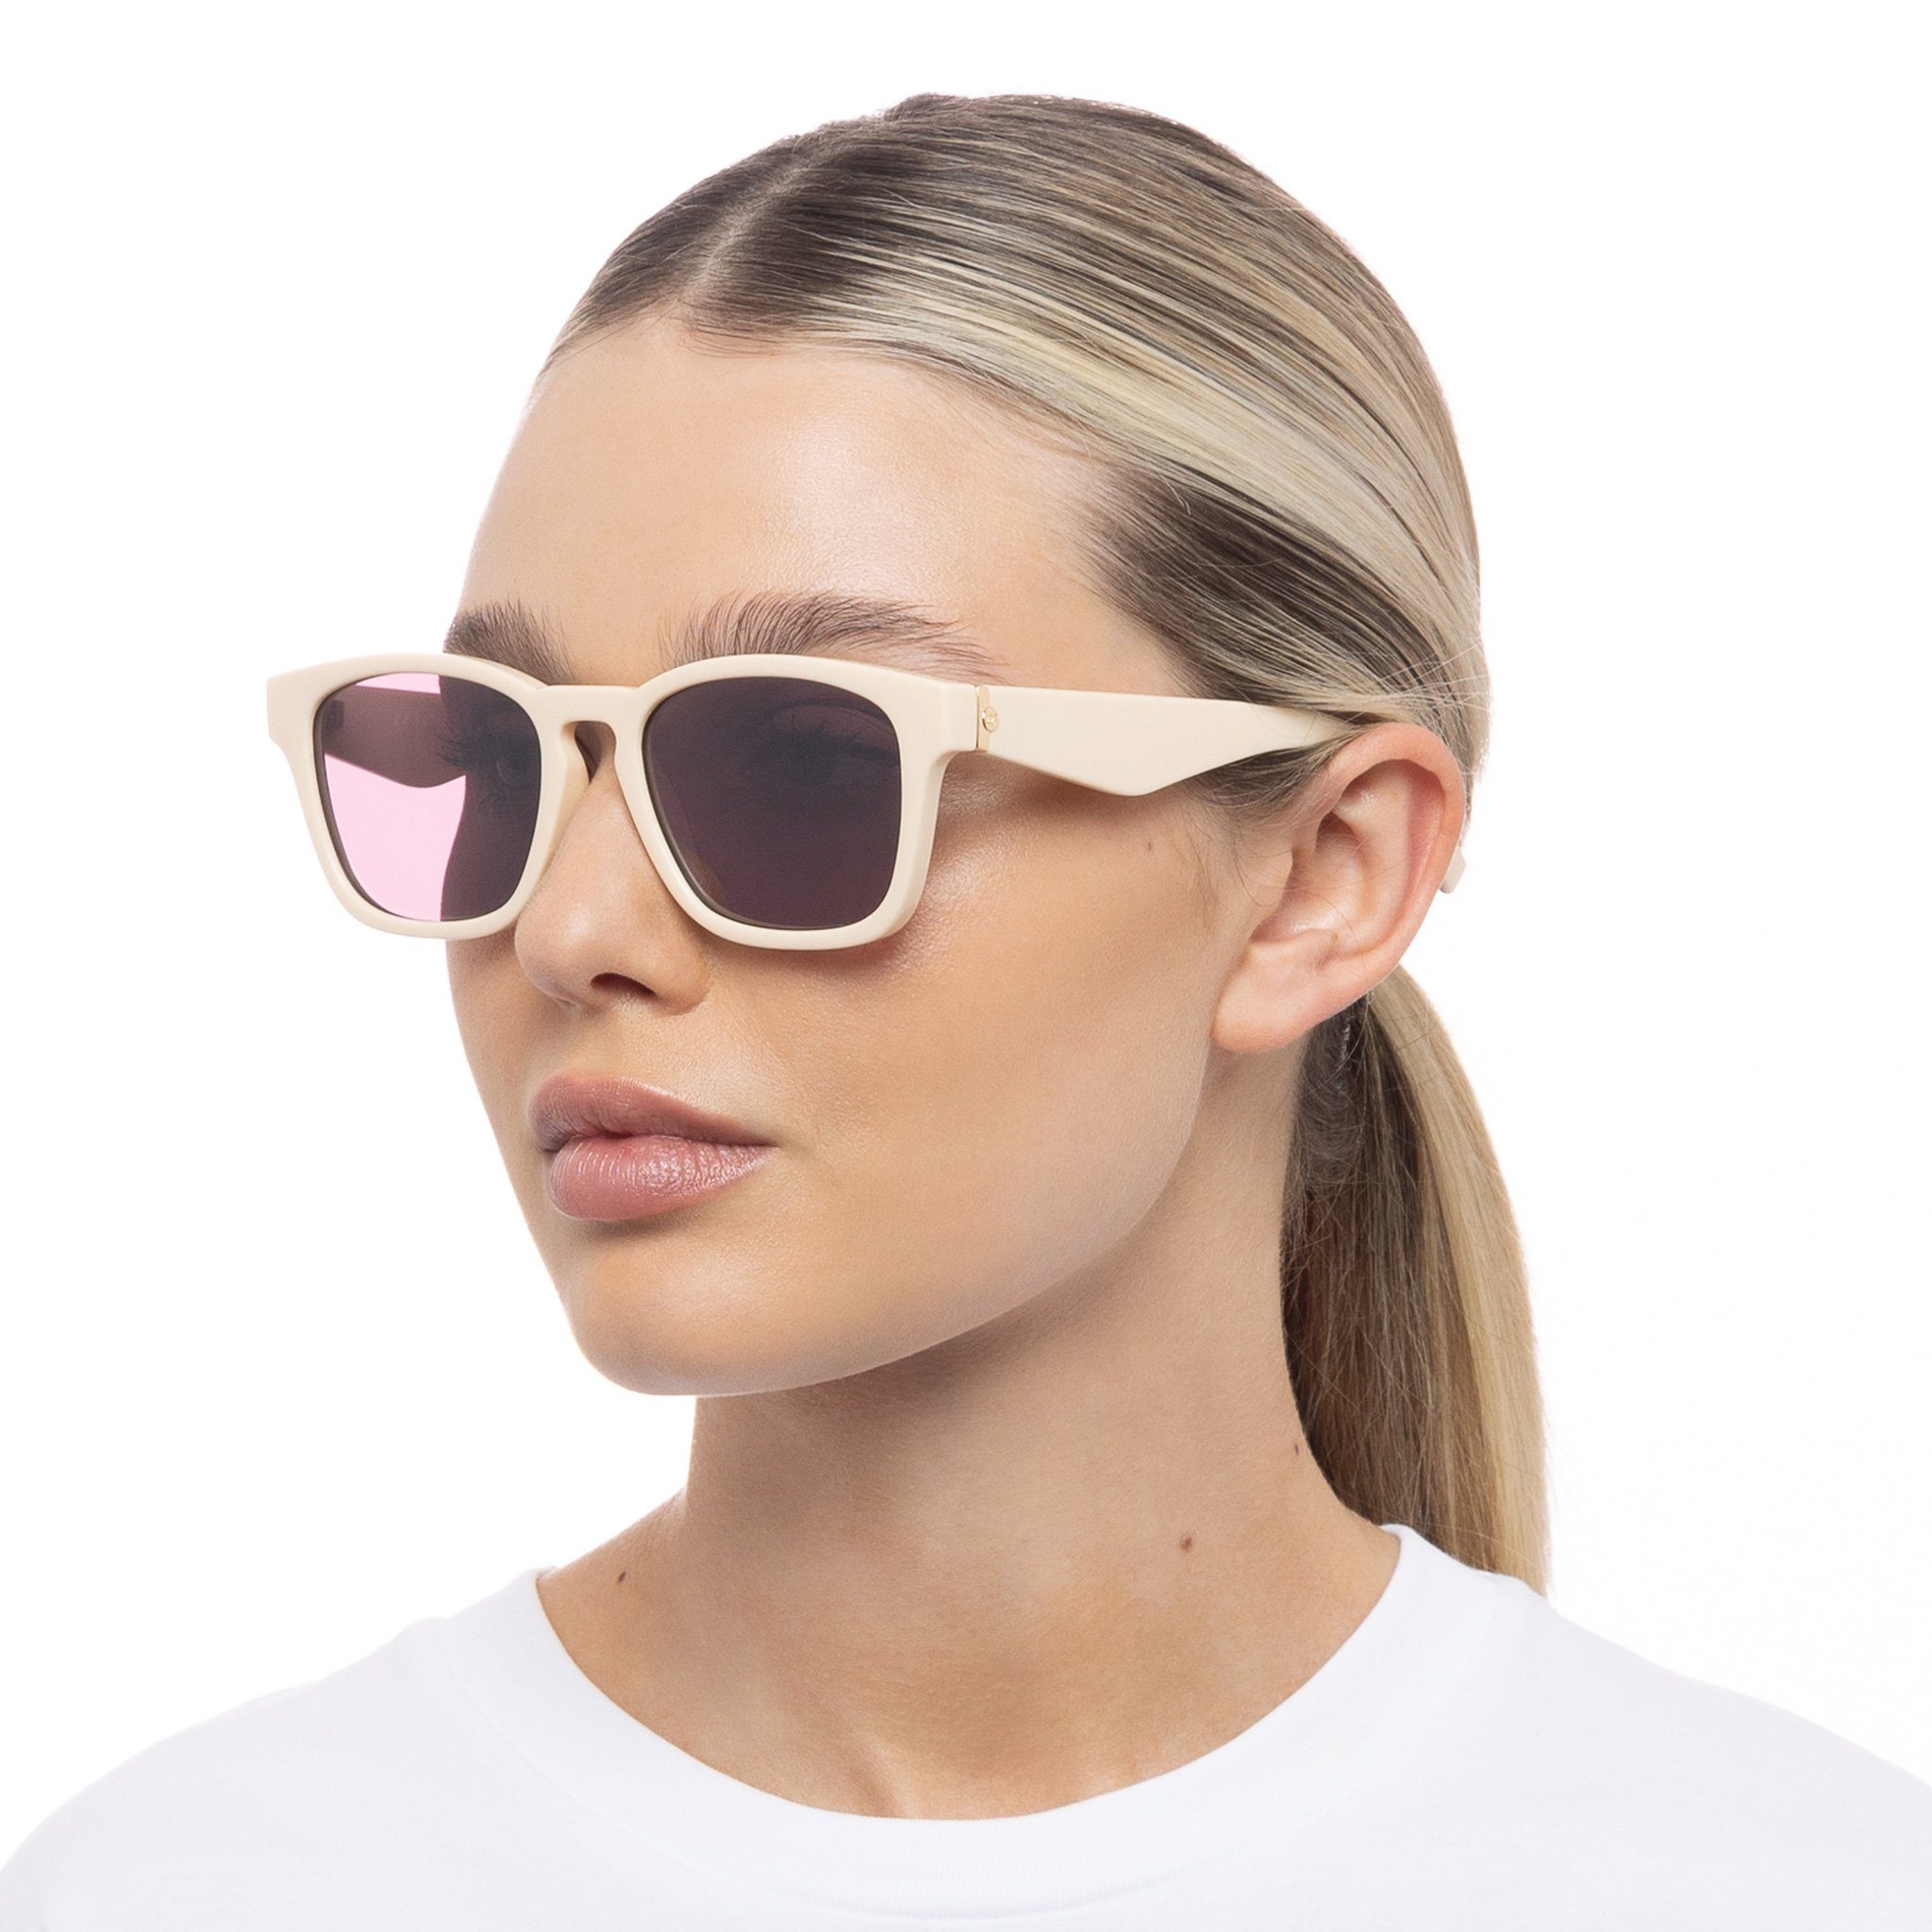 PLAYERS Sonnenbrille Ivory PLAYA SPECS LE